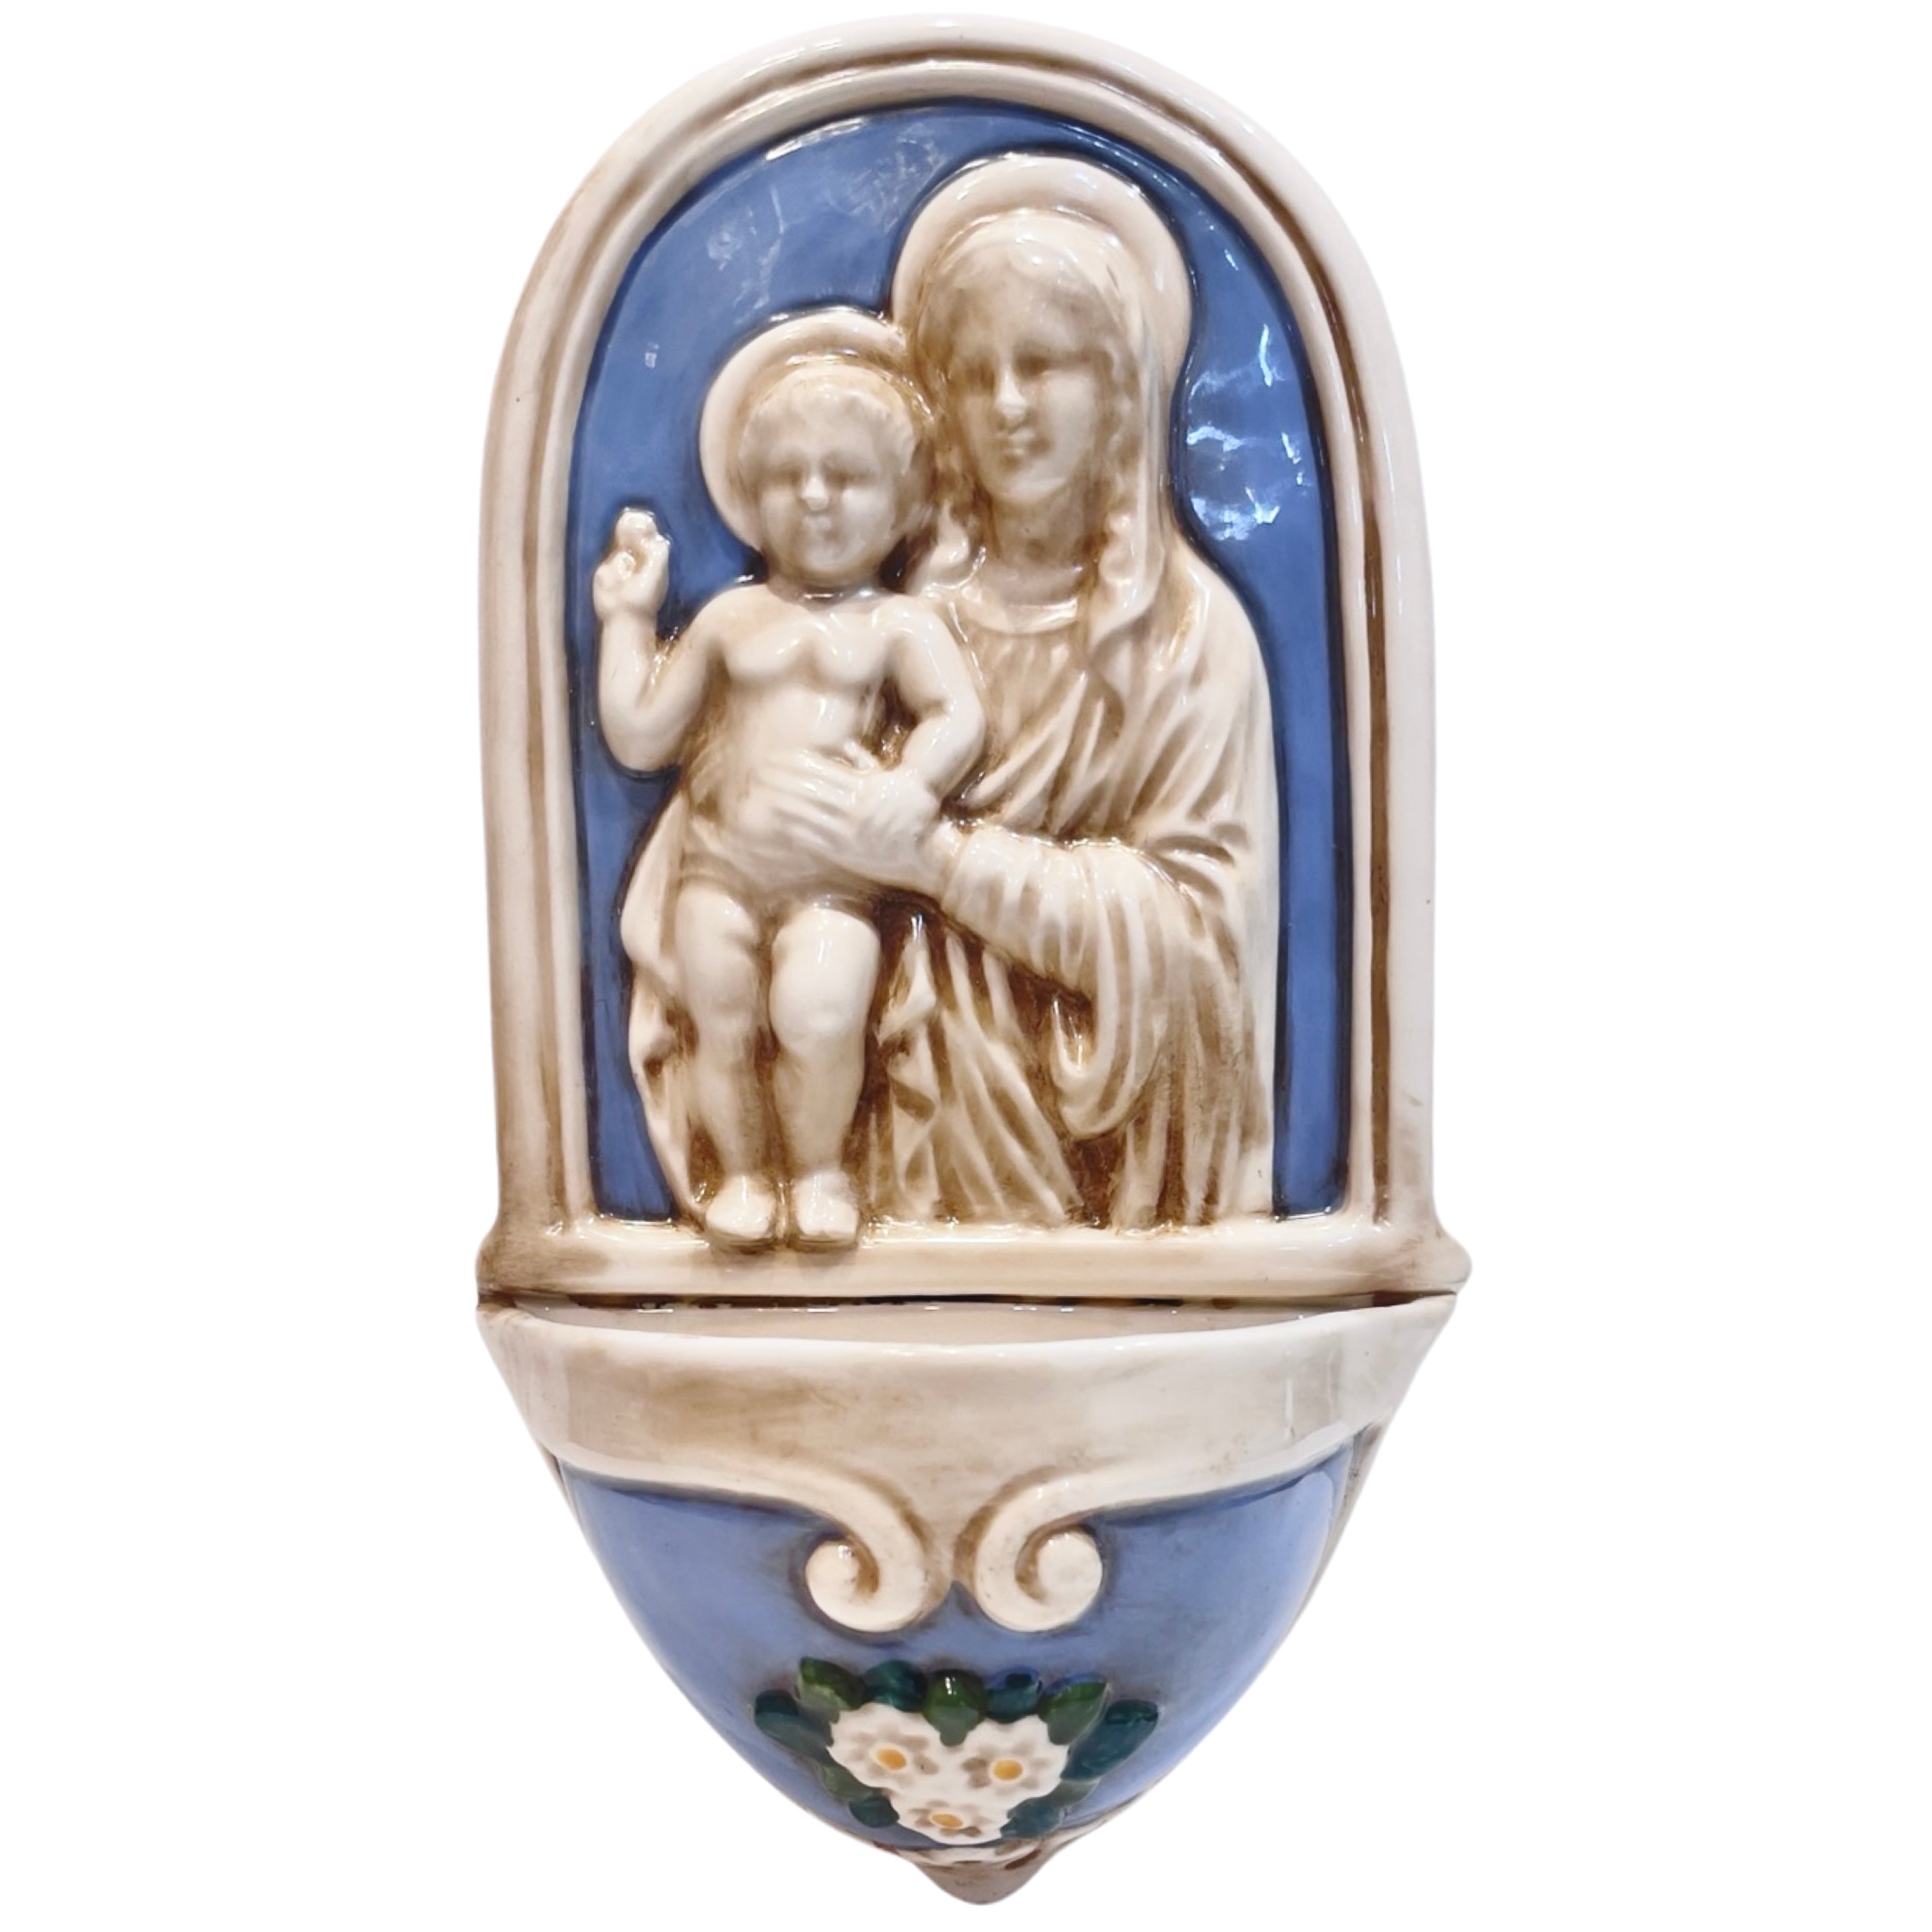 Holy Water Font: Mary & Baby Jesus - 10" x 5"